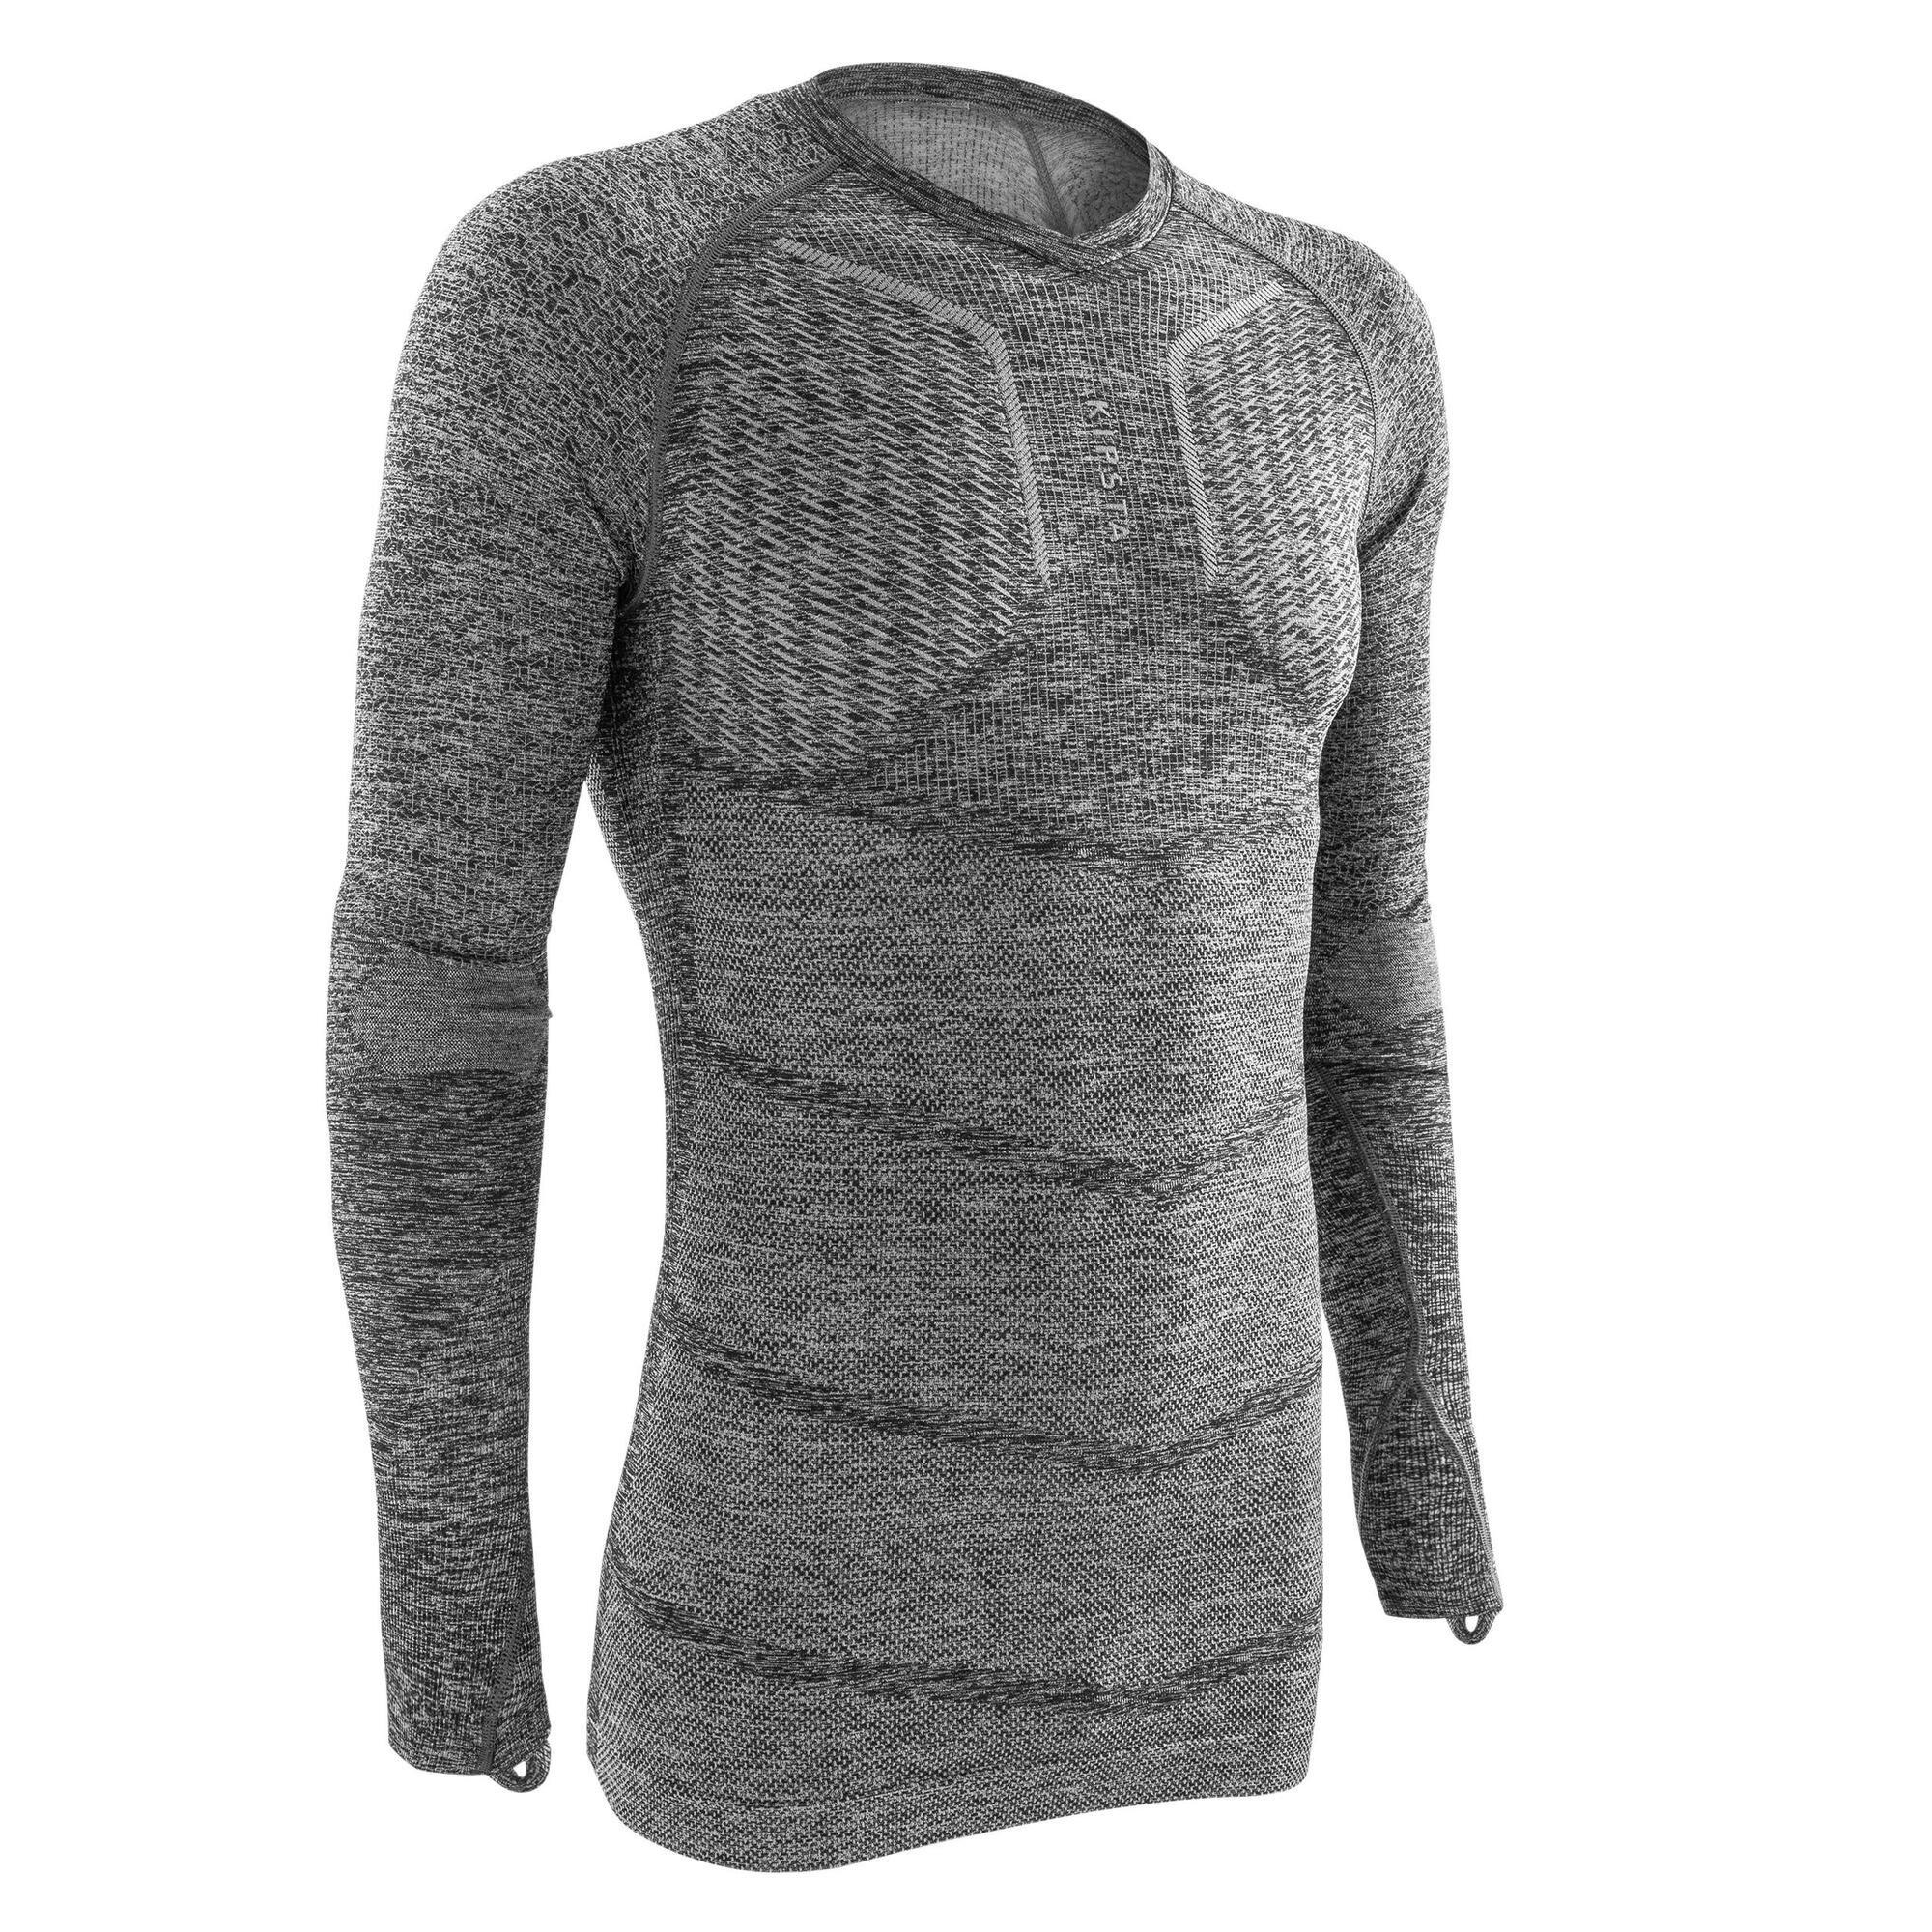 Adult Long-Sleeved Thermal Base Layer Top Keepdry 500